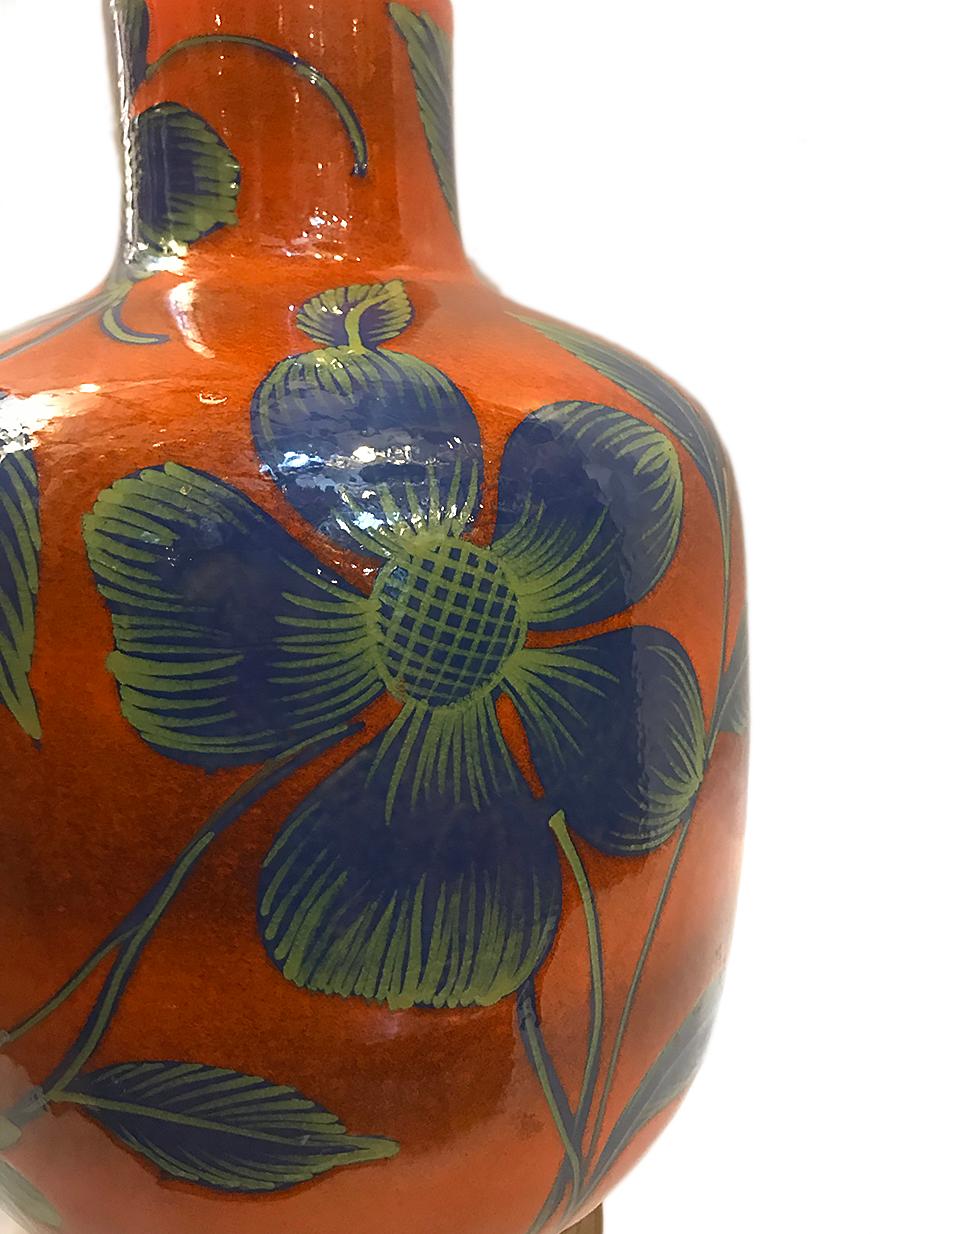 Italian hand painted and glazed porcelain lamp with oversized blue flowers on a burnt orange background, circa 1960s.
Measurements:
Height of body:  18.75